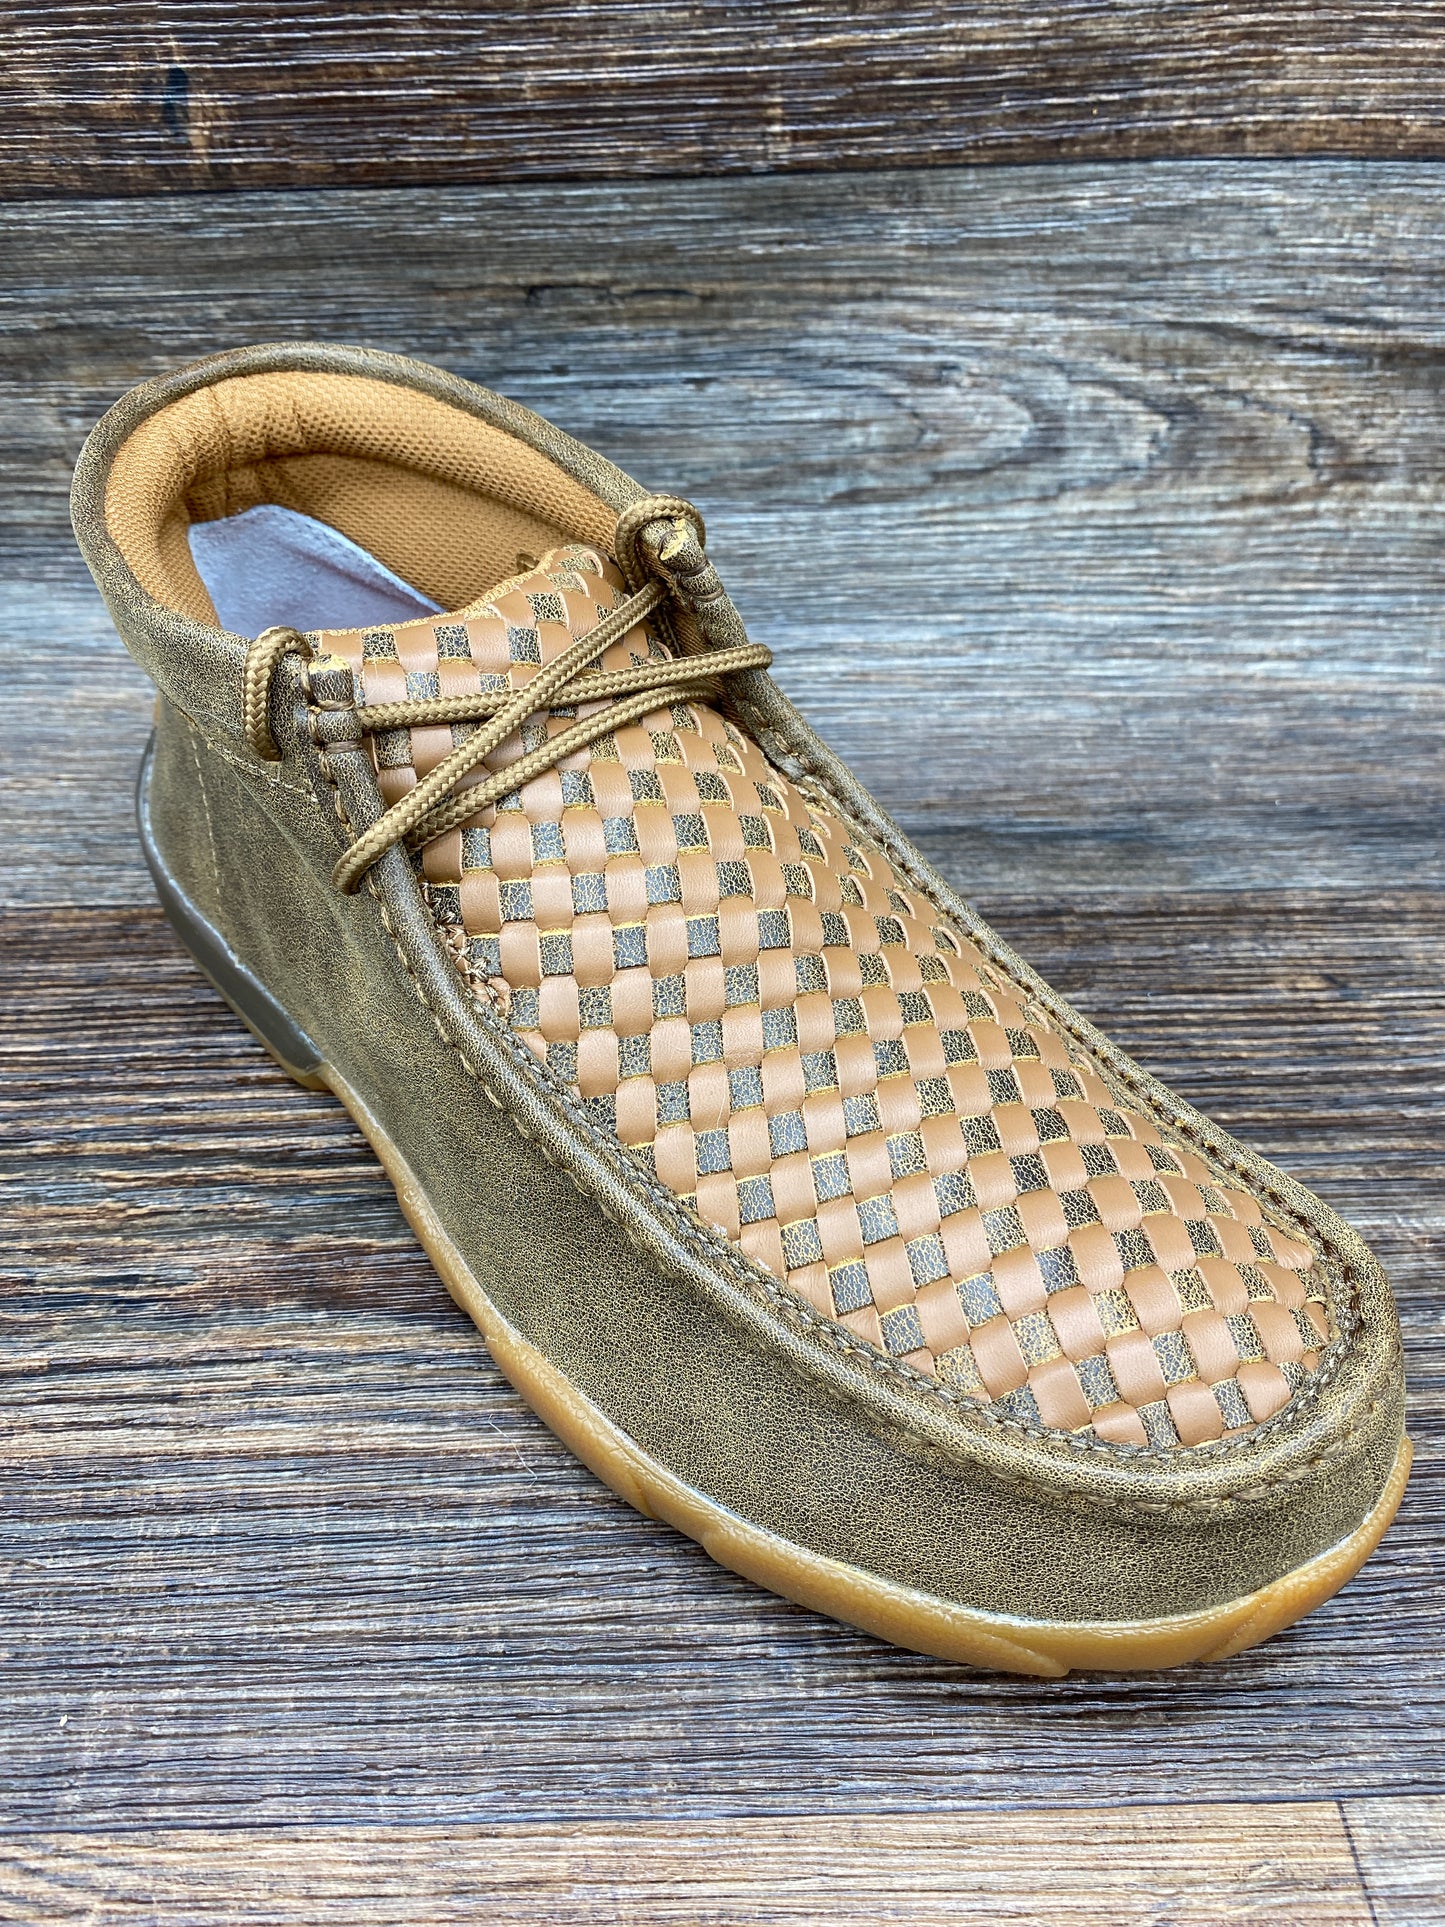 mdm0033 Men's Driving Moc Casual Shoe with Basket Weave by Twisted X